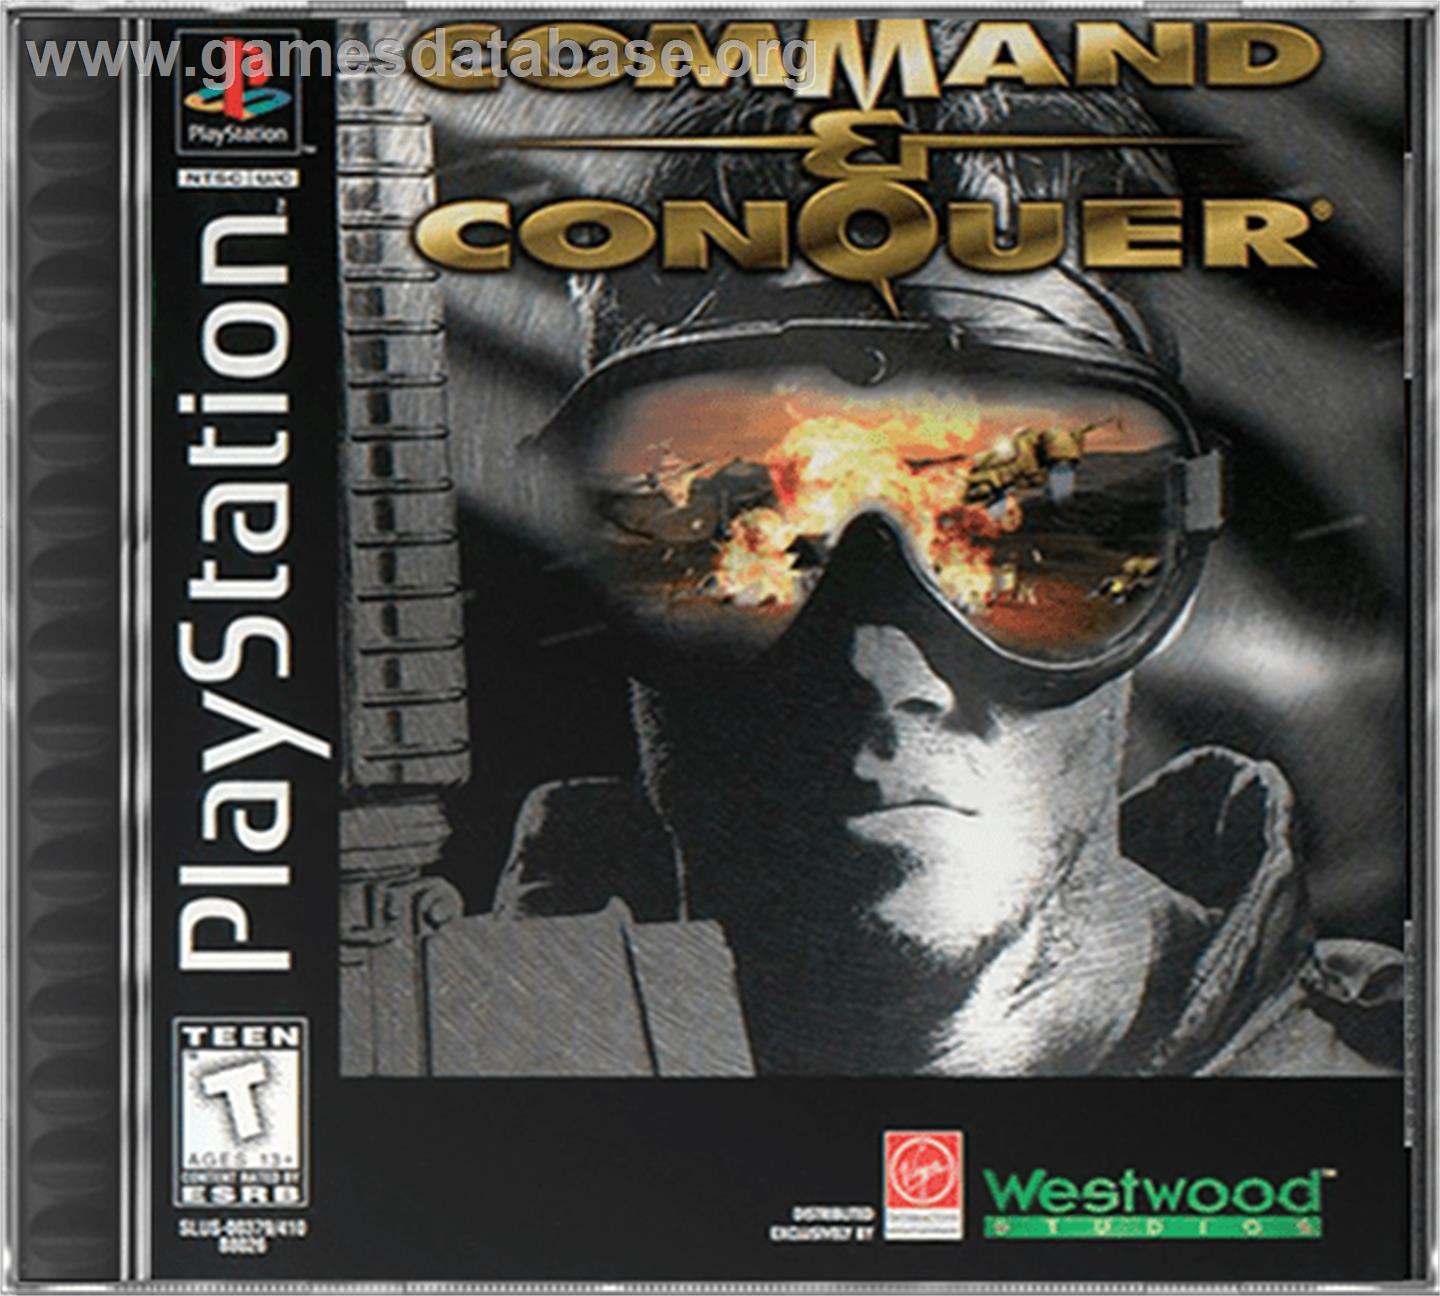 Command & Conquer - Sony Playstation - Artwork - Box